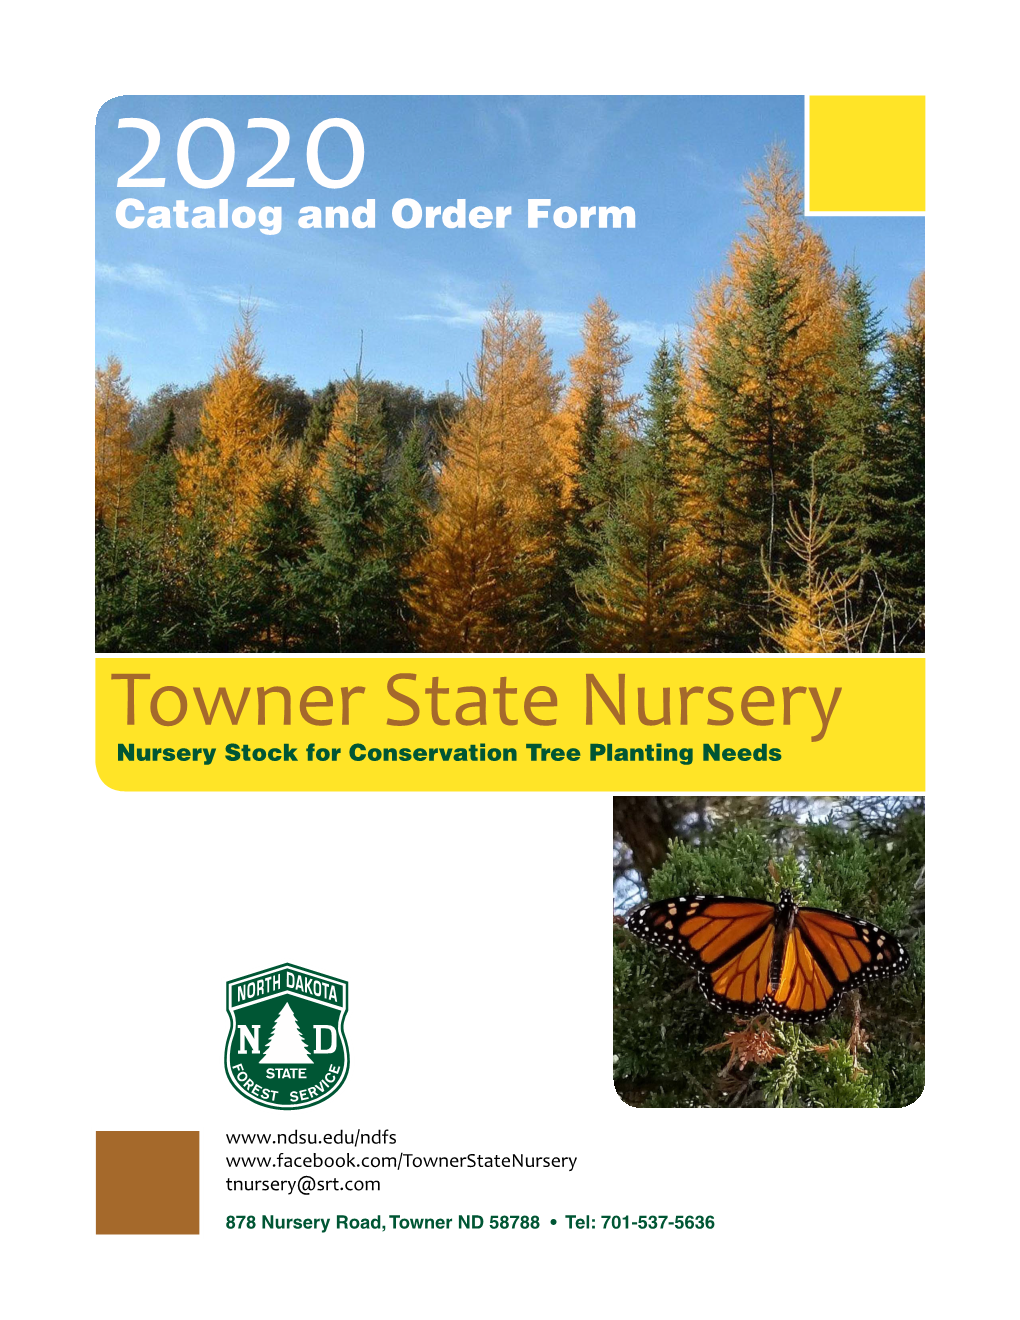 Towner State Nursery Nursery Stock for Conservation Tree Planting Needs